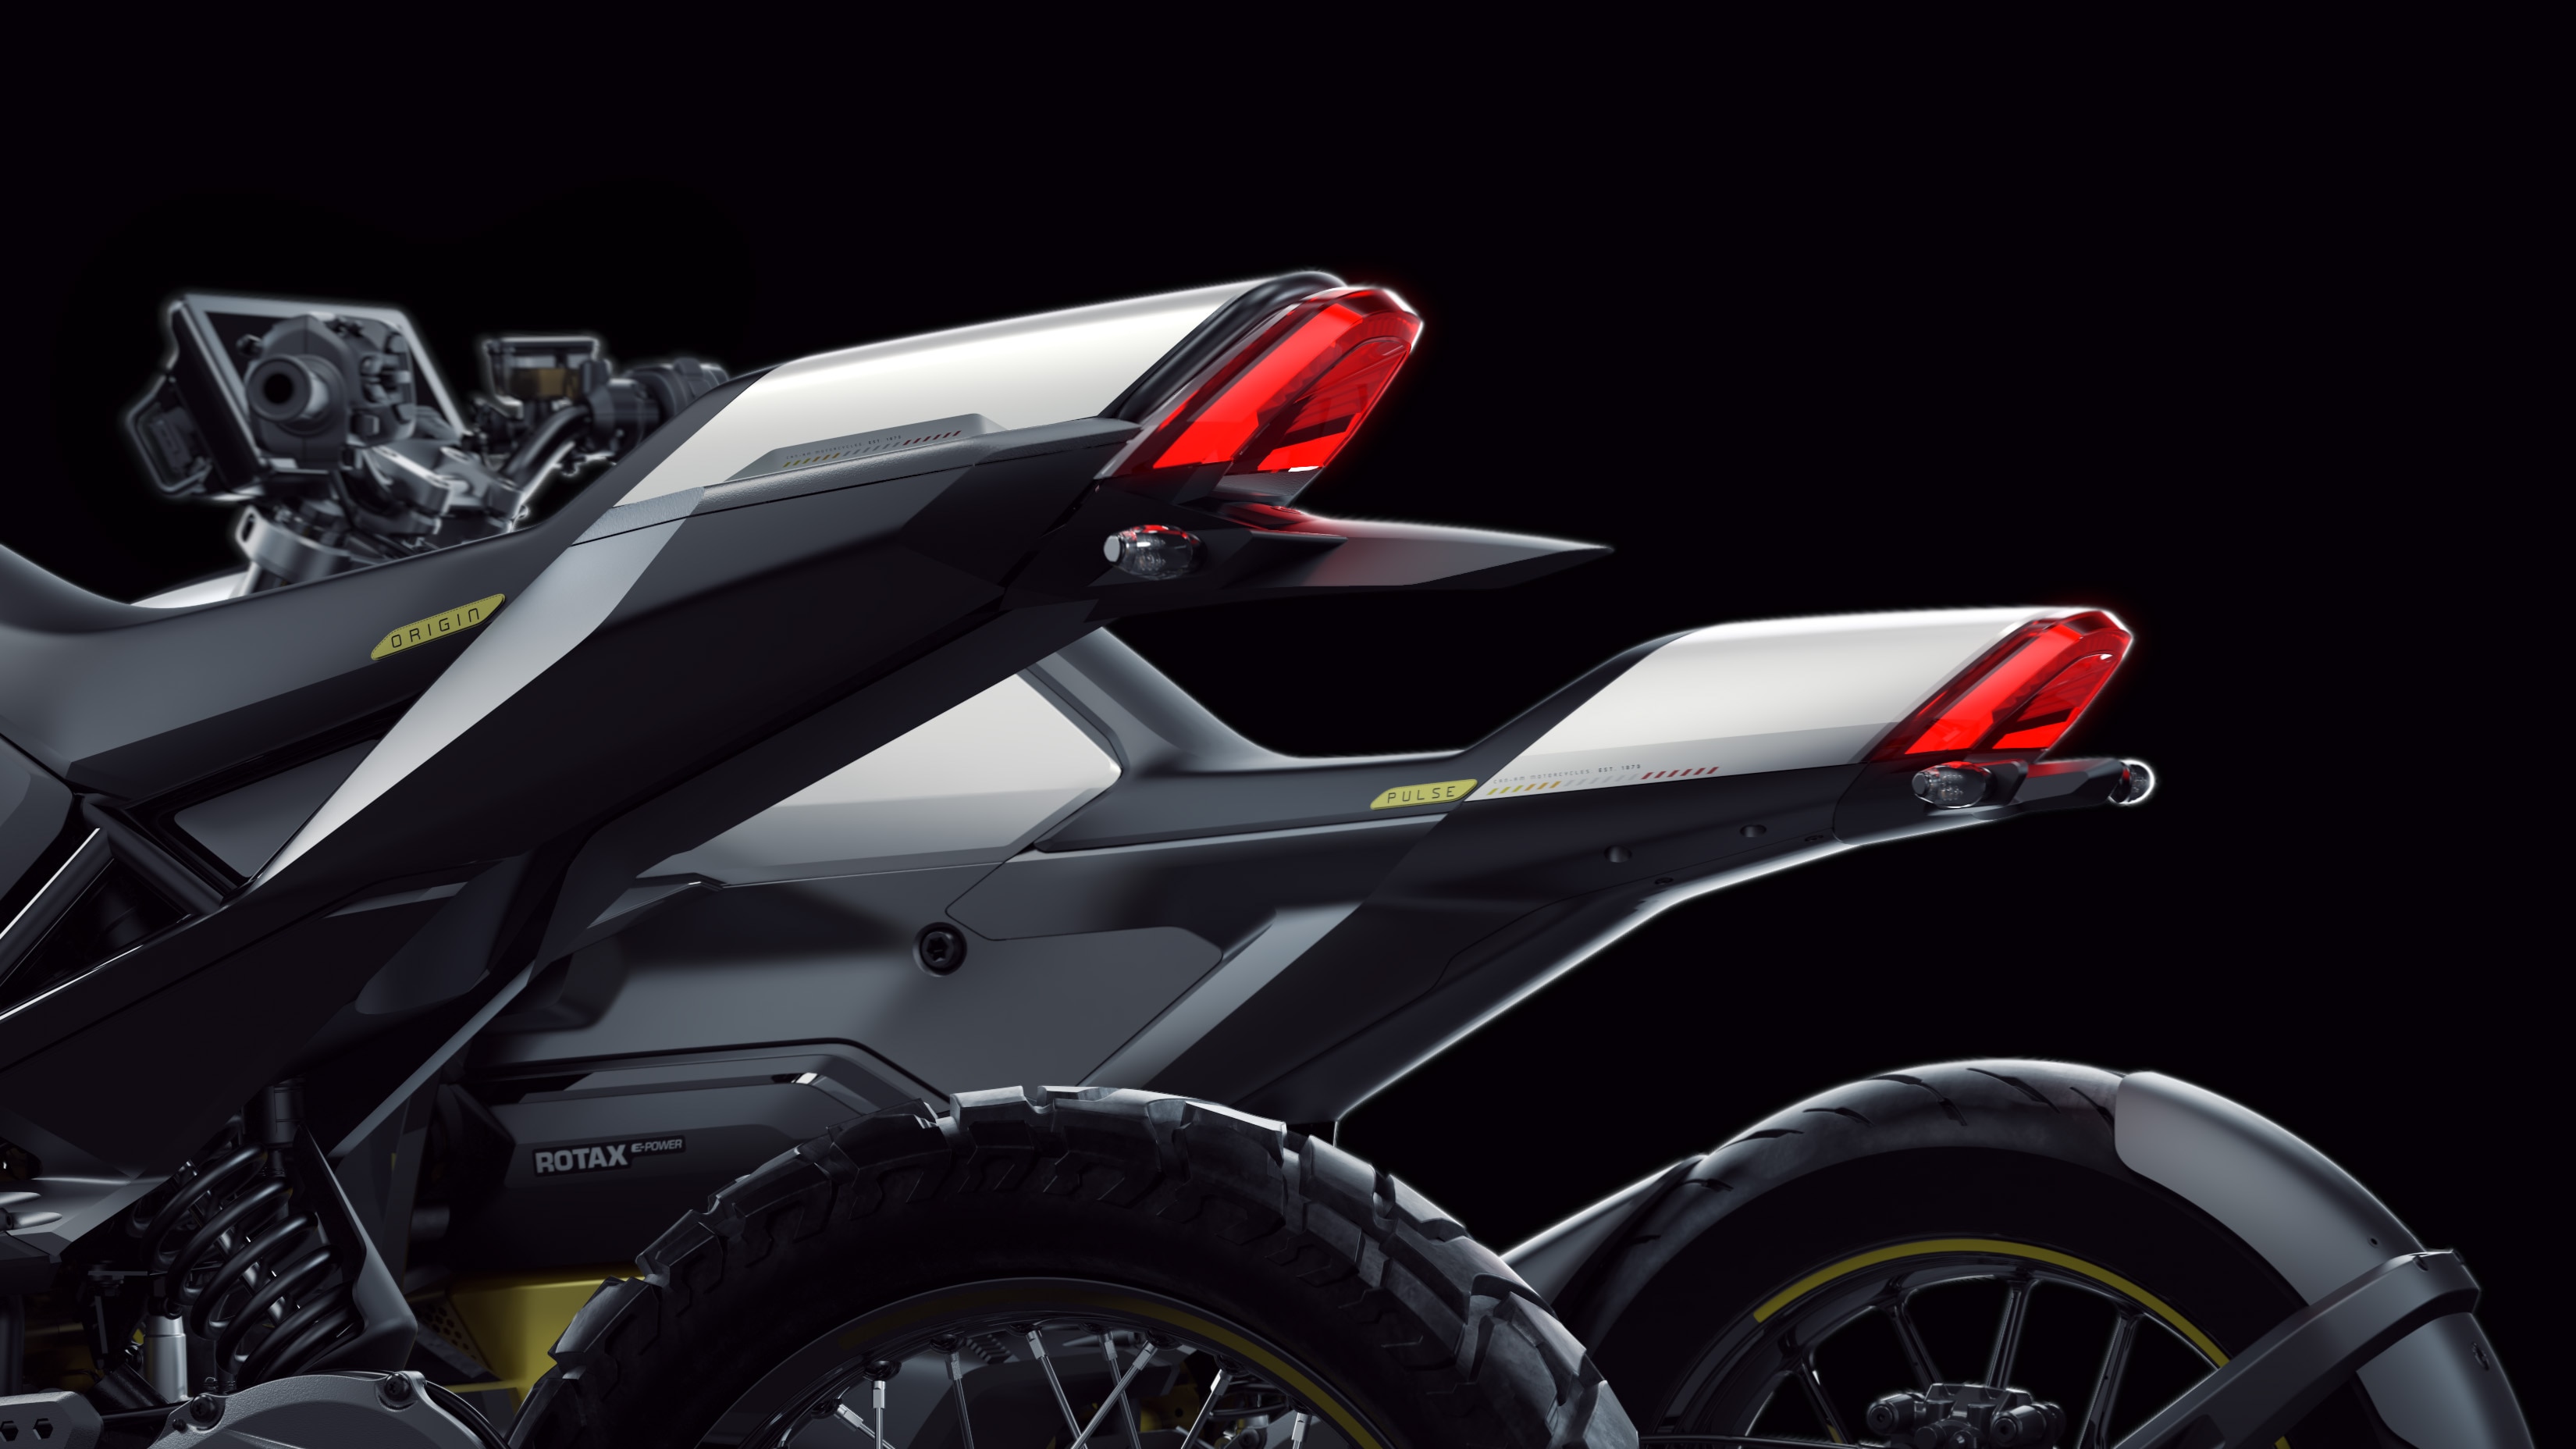 Can-Am Pulse & Can-Am Origin : rear view of the motorcycles